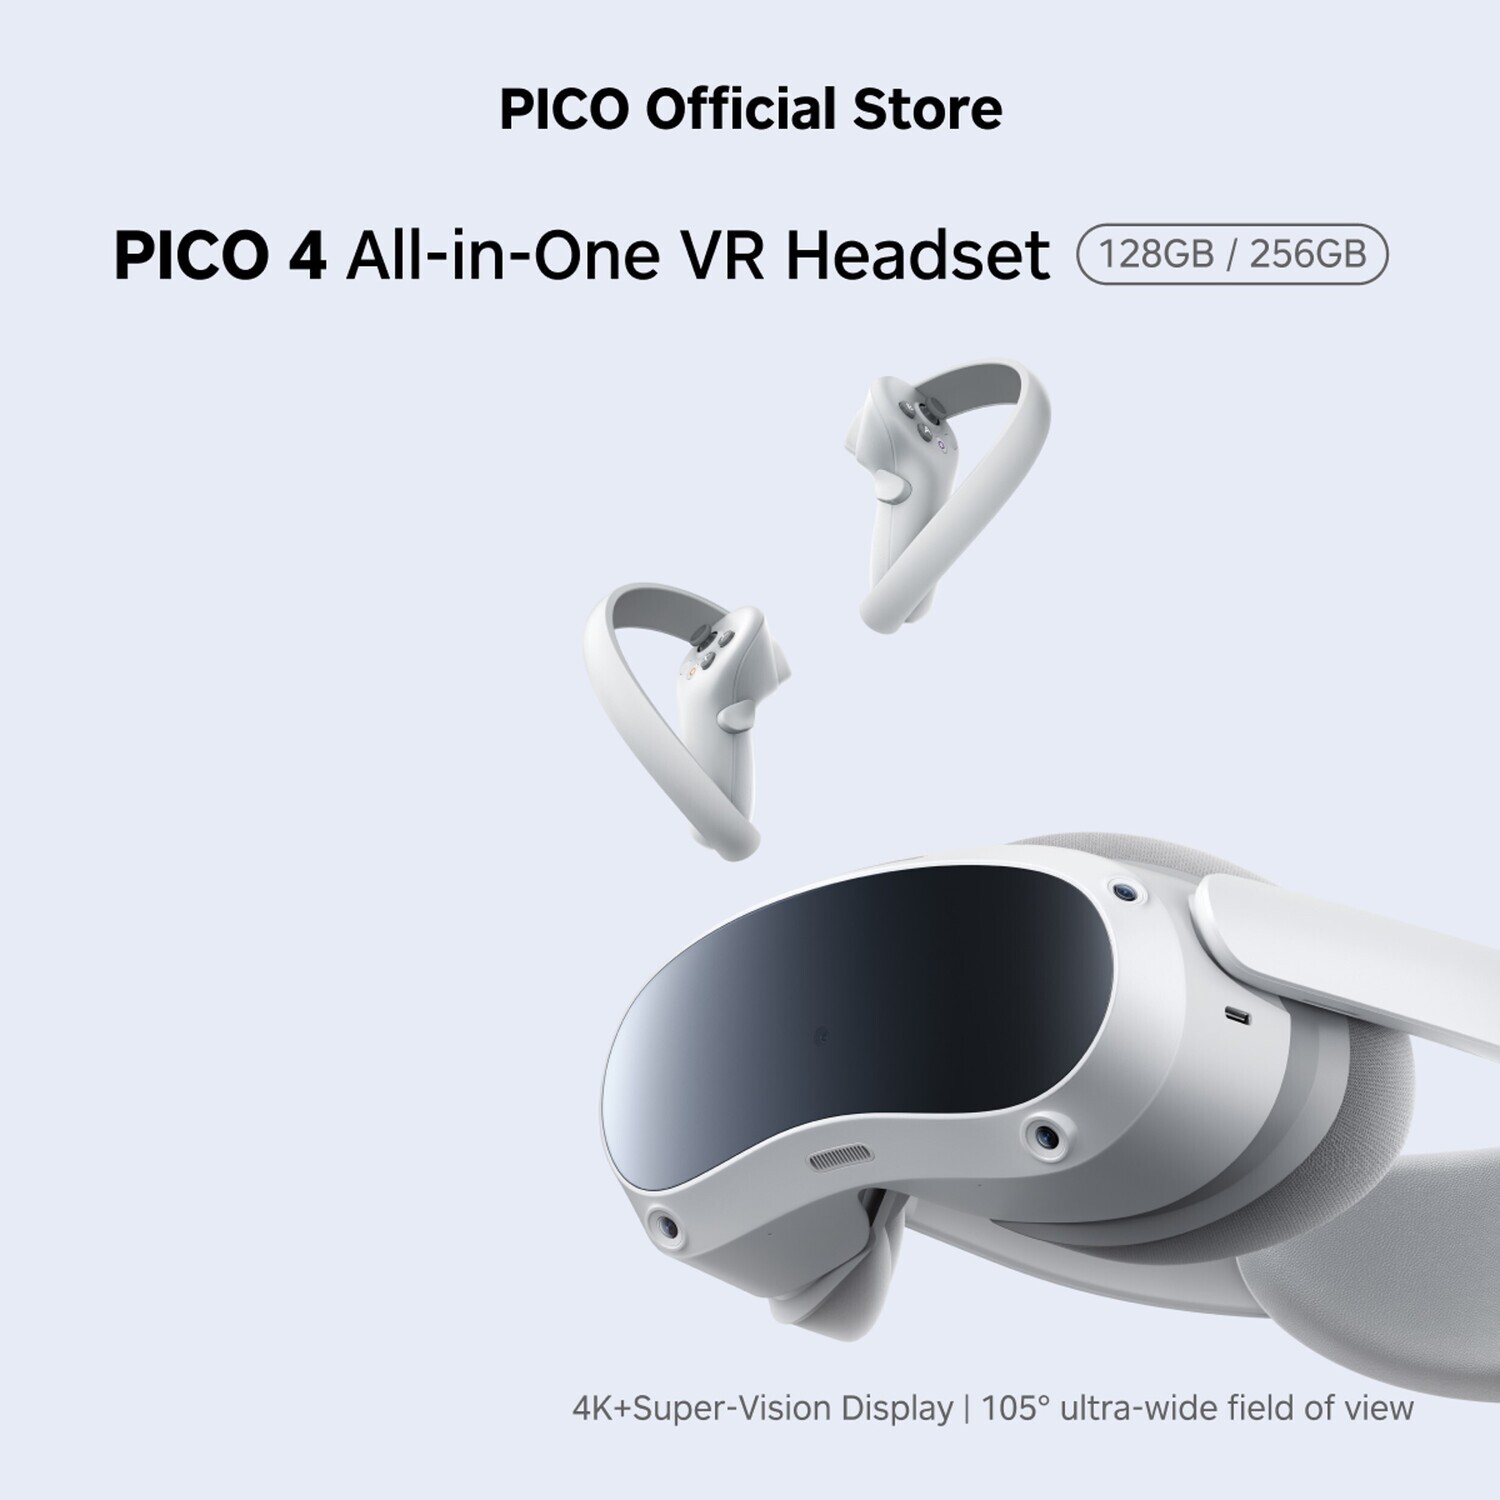 PICO 4 8/256GB All-In-One 4K+ Resolution VR Headset